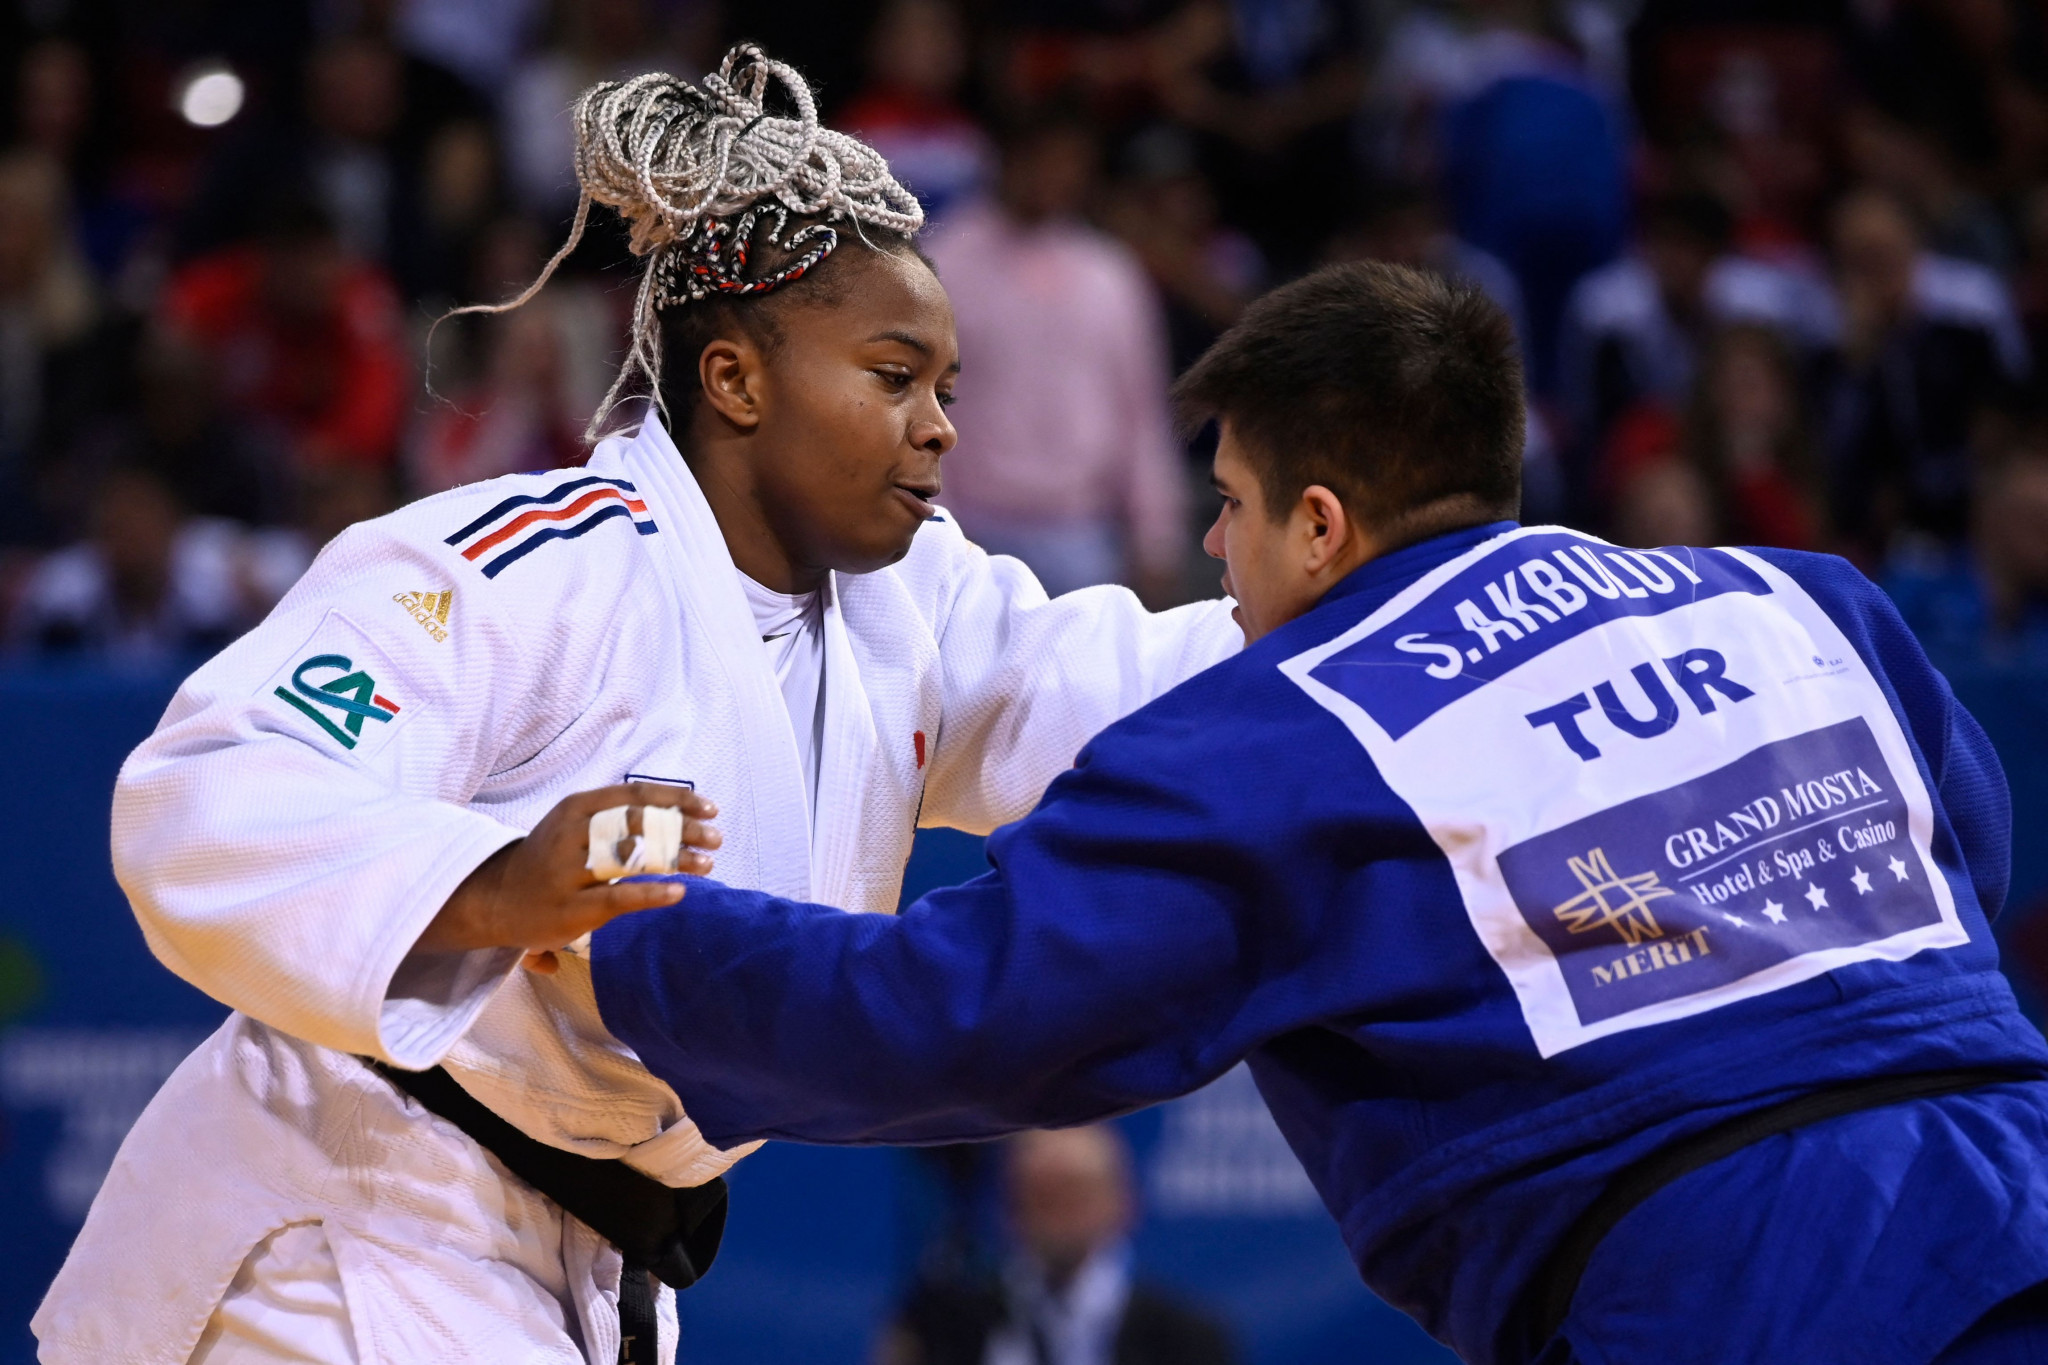 The President of the Turkish Judo Federation is hoping the nation can win a medal at next year's Paris 2024 Olympics ©Getty Images